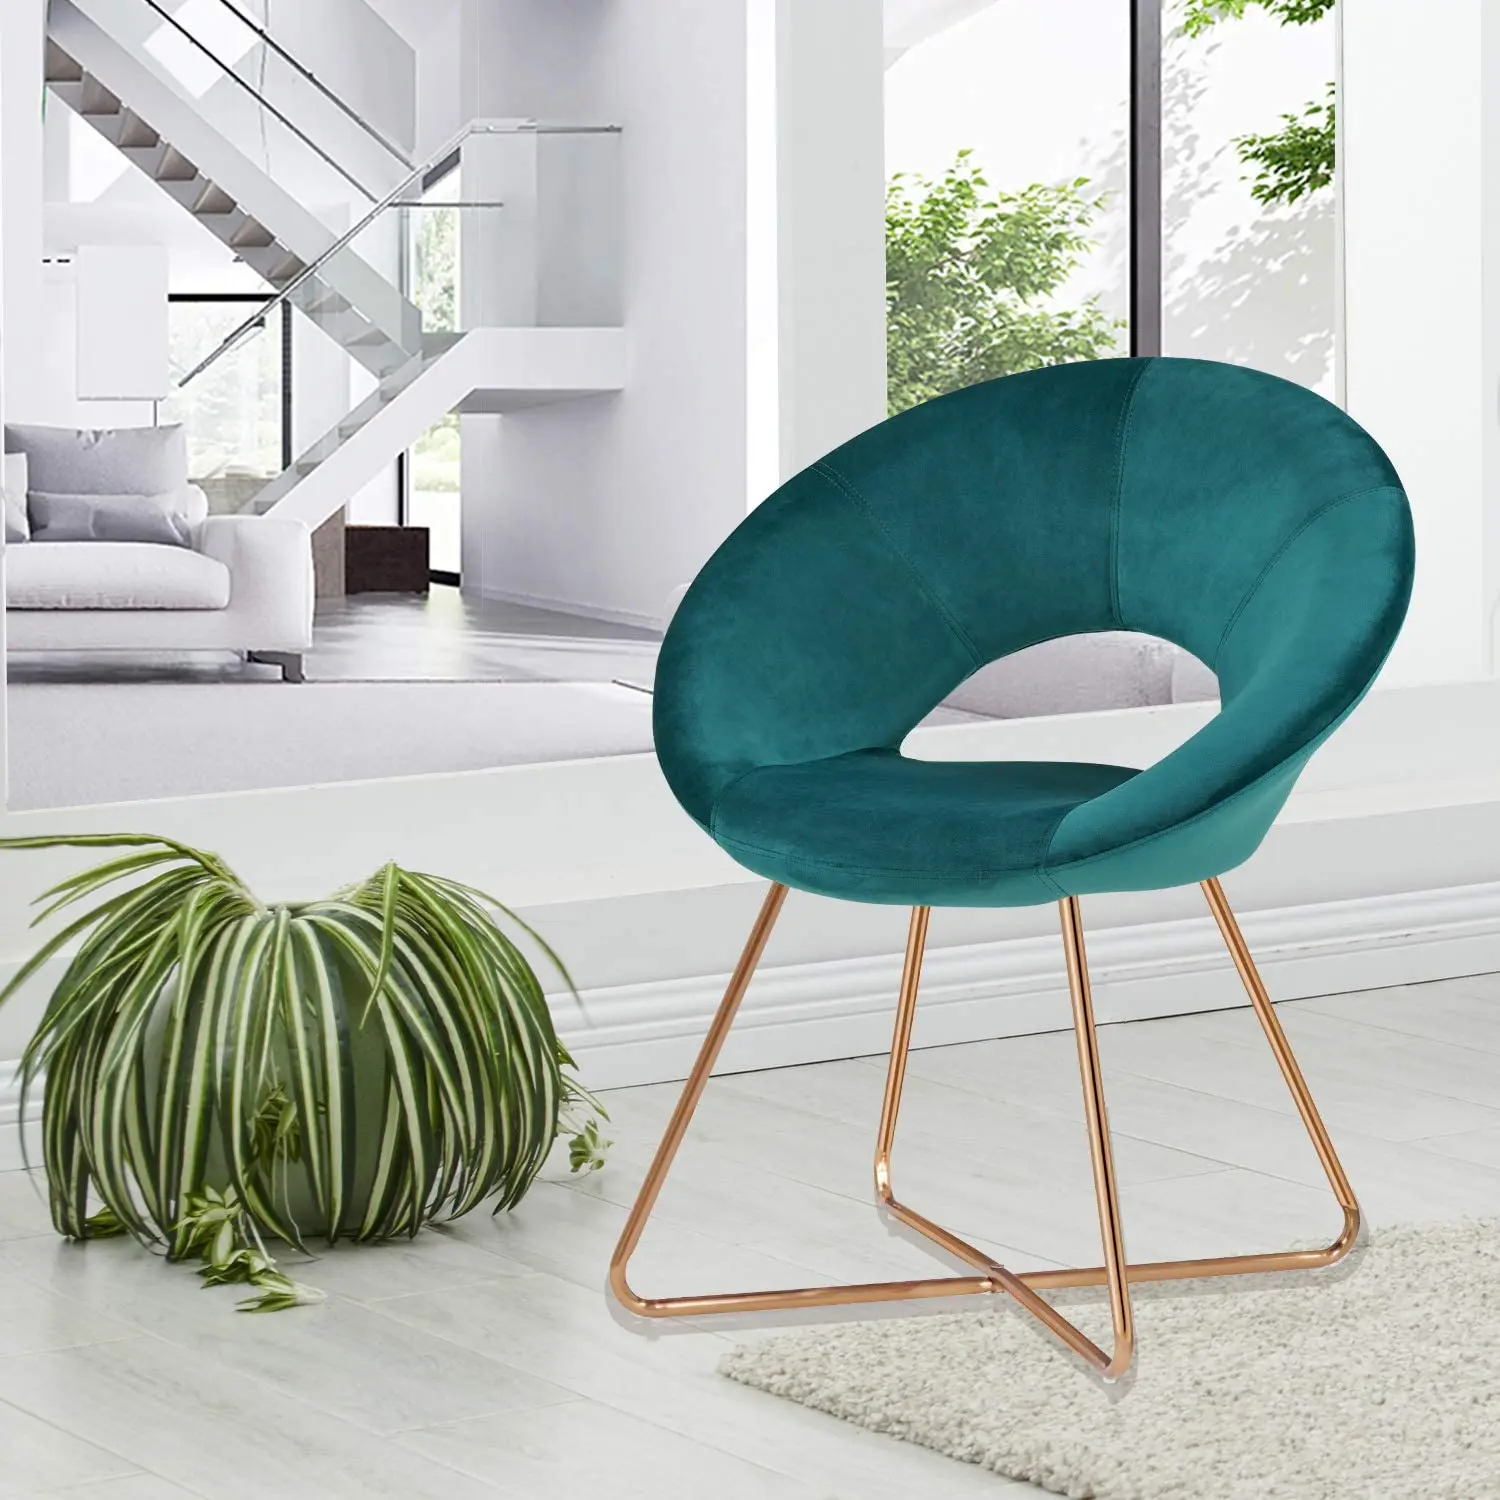 
lounge chair ottoman modern dining chair velvet armchair furniture vanity genuine leather arm for round chair modern beetle 